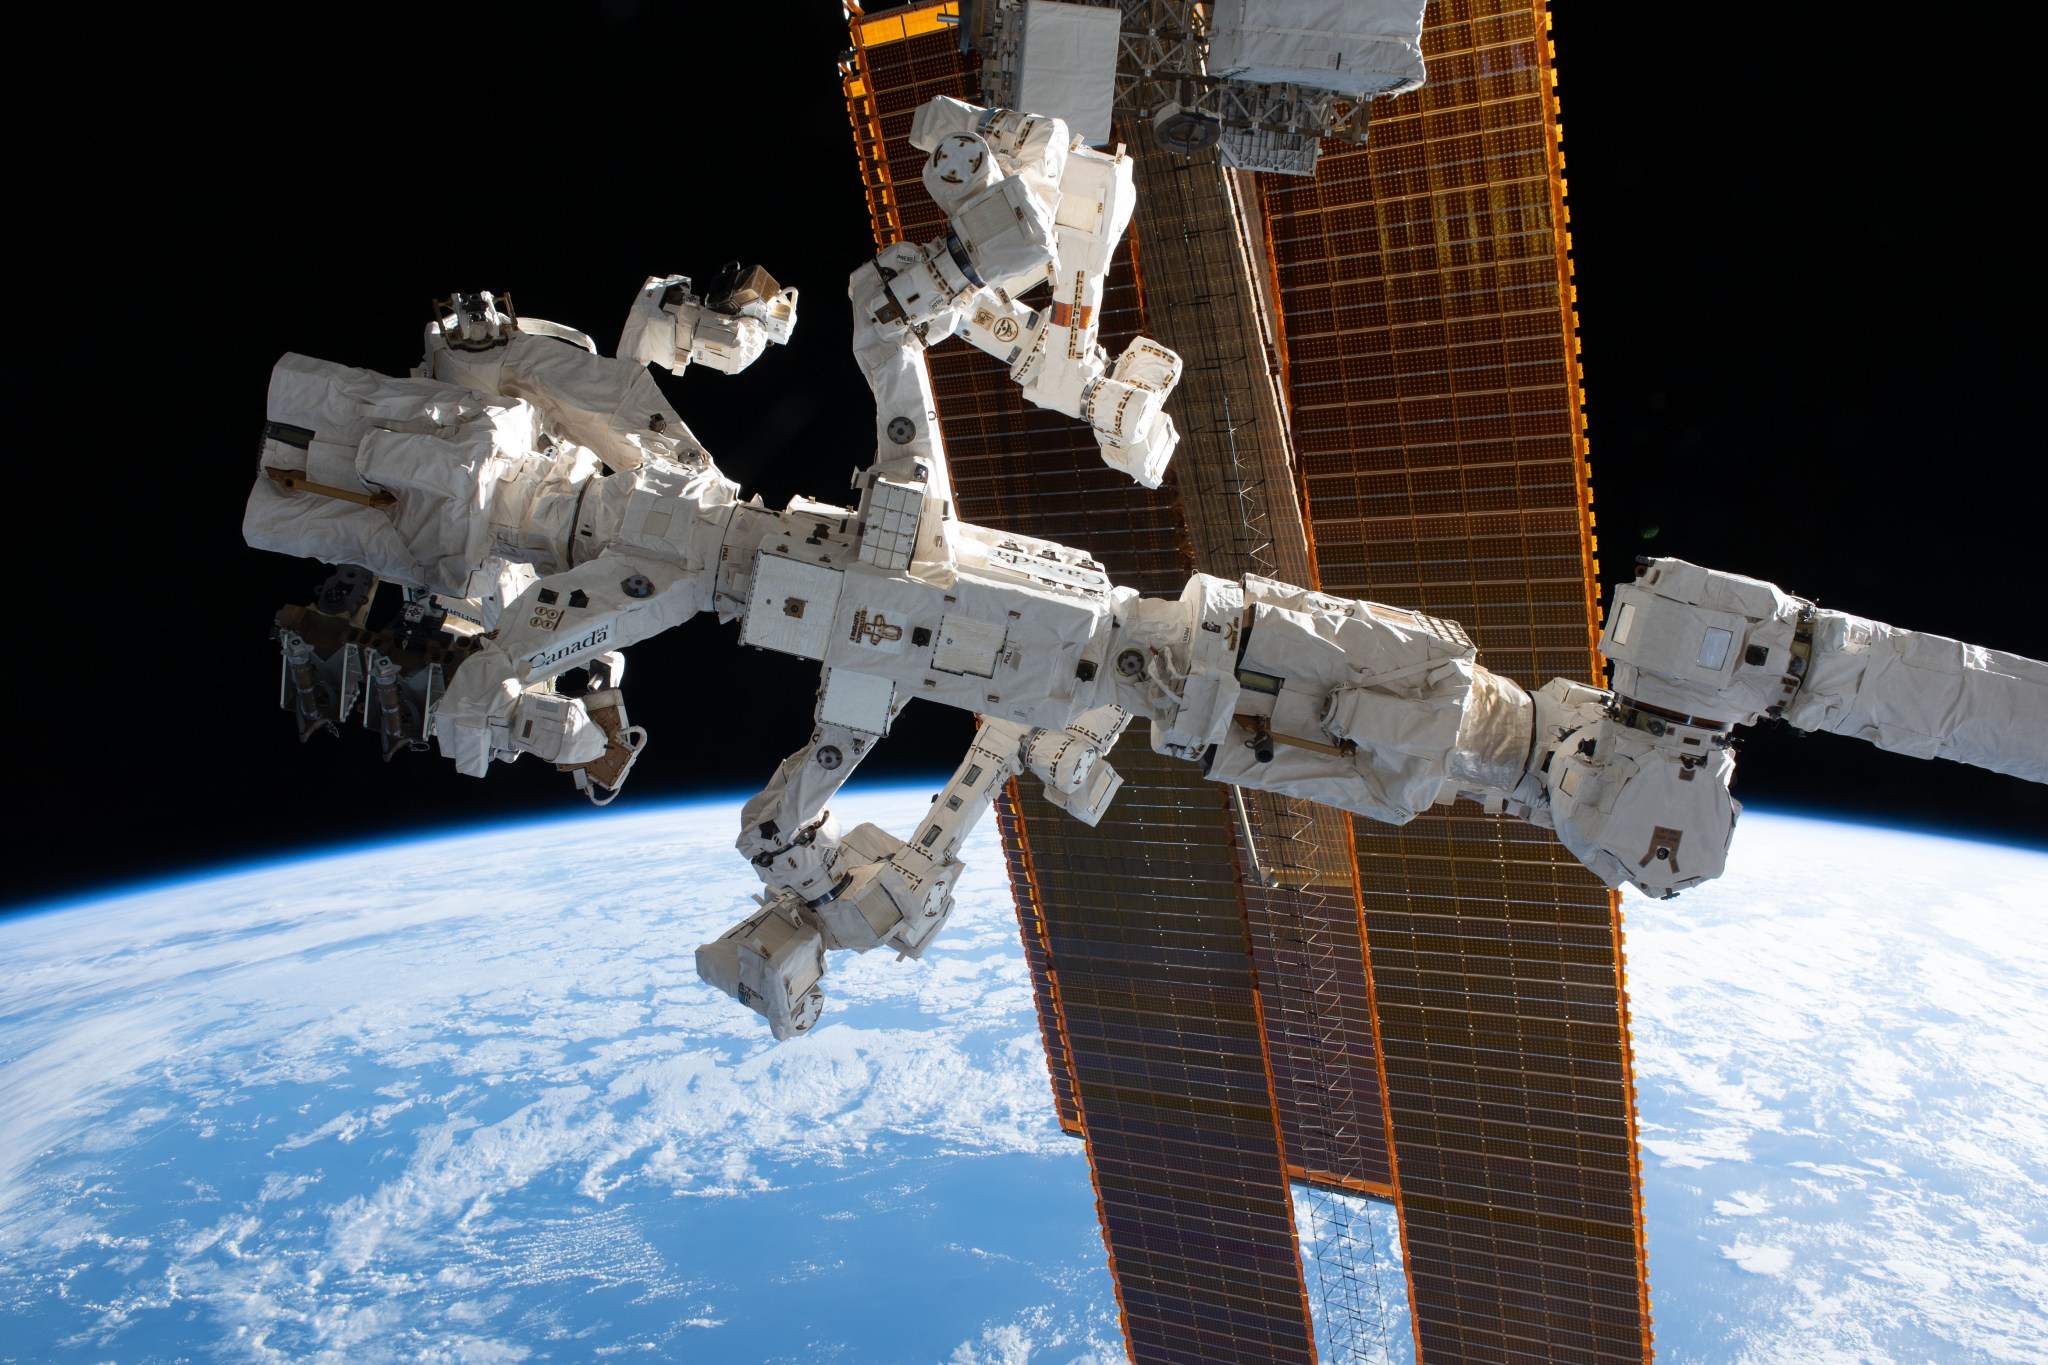 The Special Purpose Dexterous Manipulator (also known as Dextre), a fine-tuned robotic hand designed and built by the Canadian Space Agency, is pictured in front of the International Space Station's main solar arrays as the orbital complex soared 260 miles above the Pacific Ocean. Dextre is attached to the leading end effector, or tip, of the Canadarm2 robotic arm.